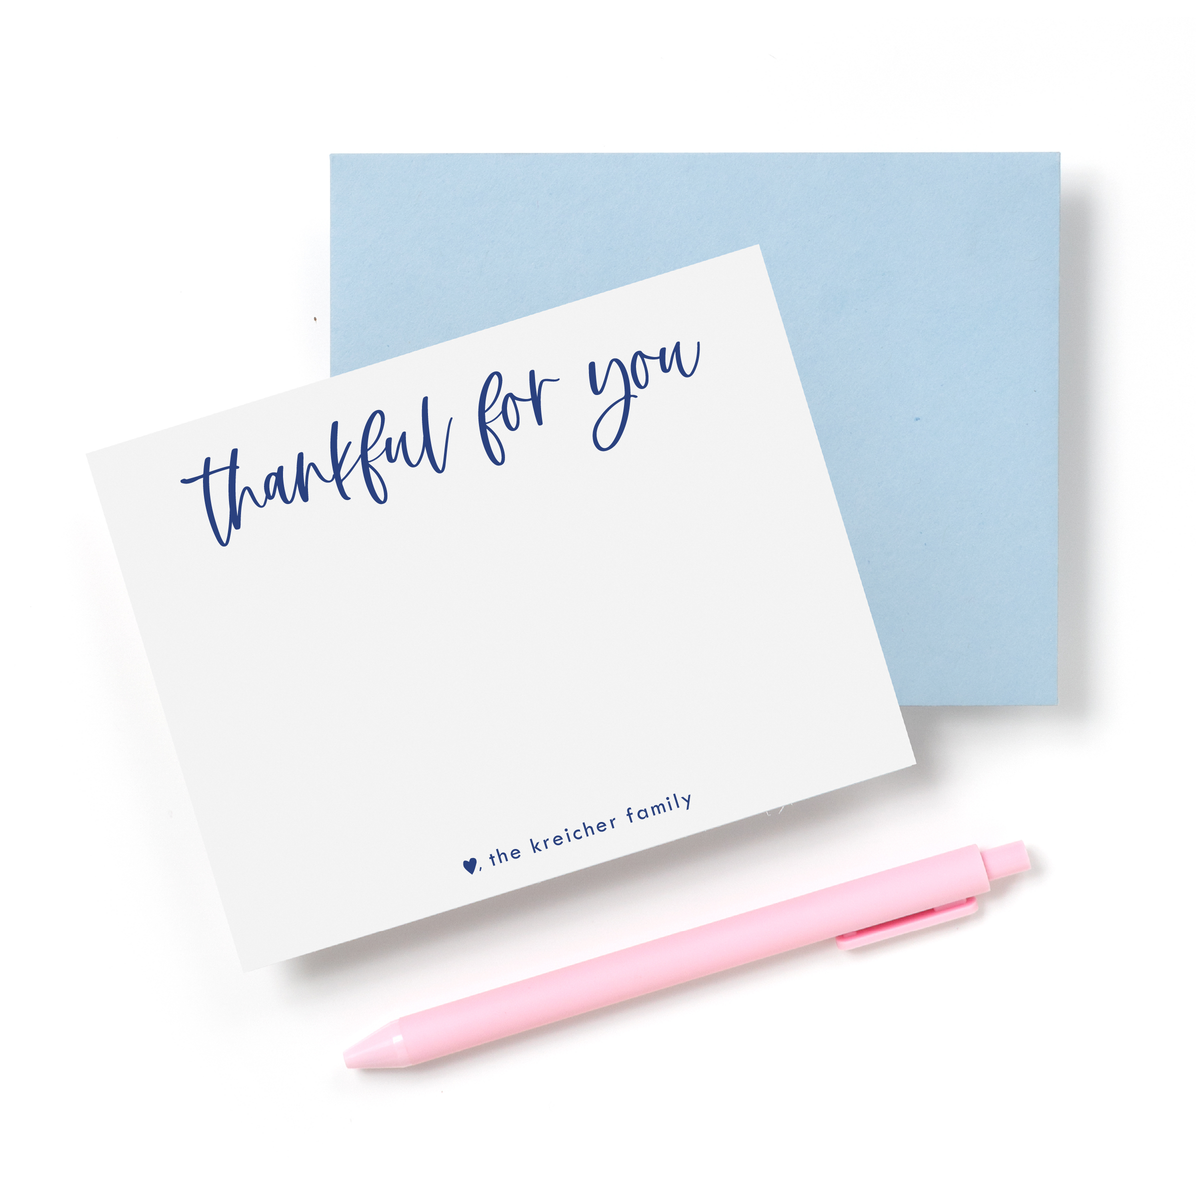 Thankful for You Personalized Stationery